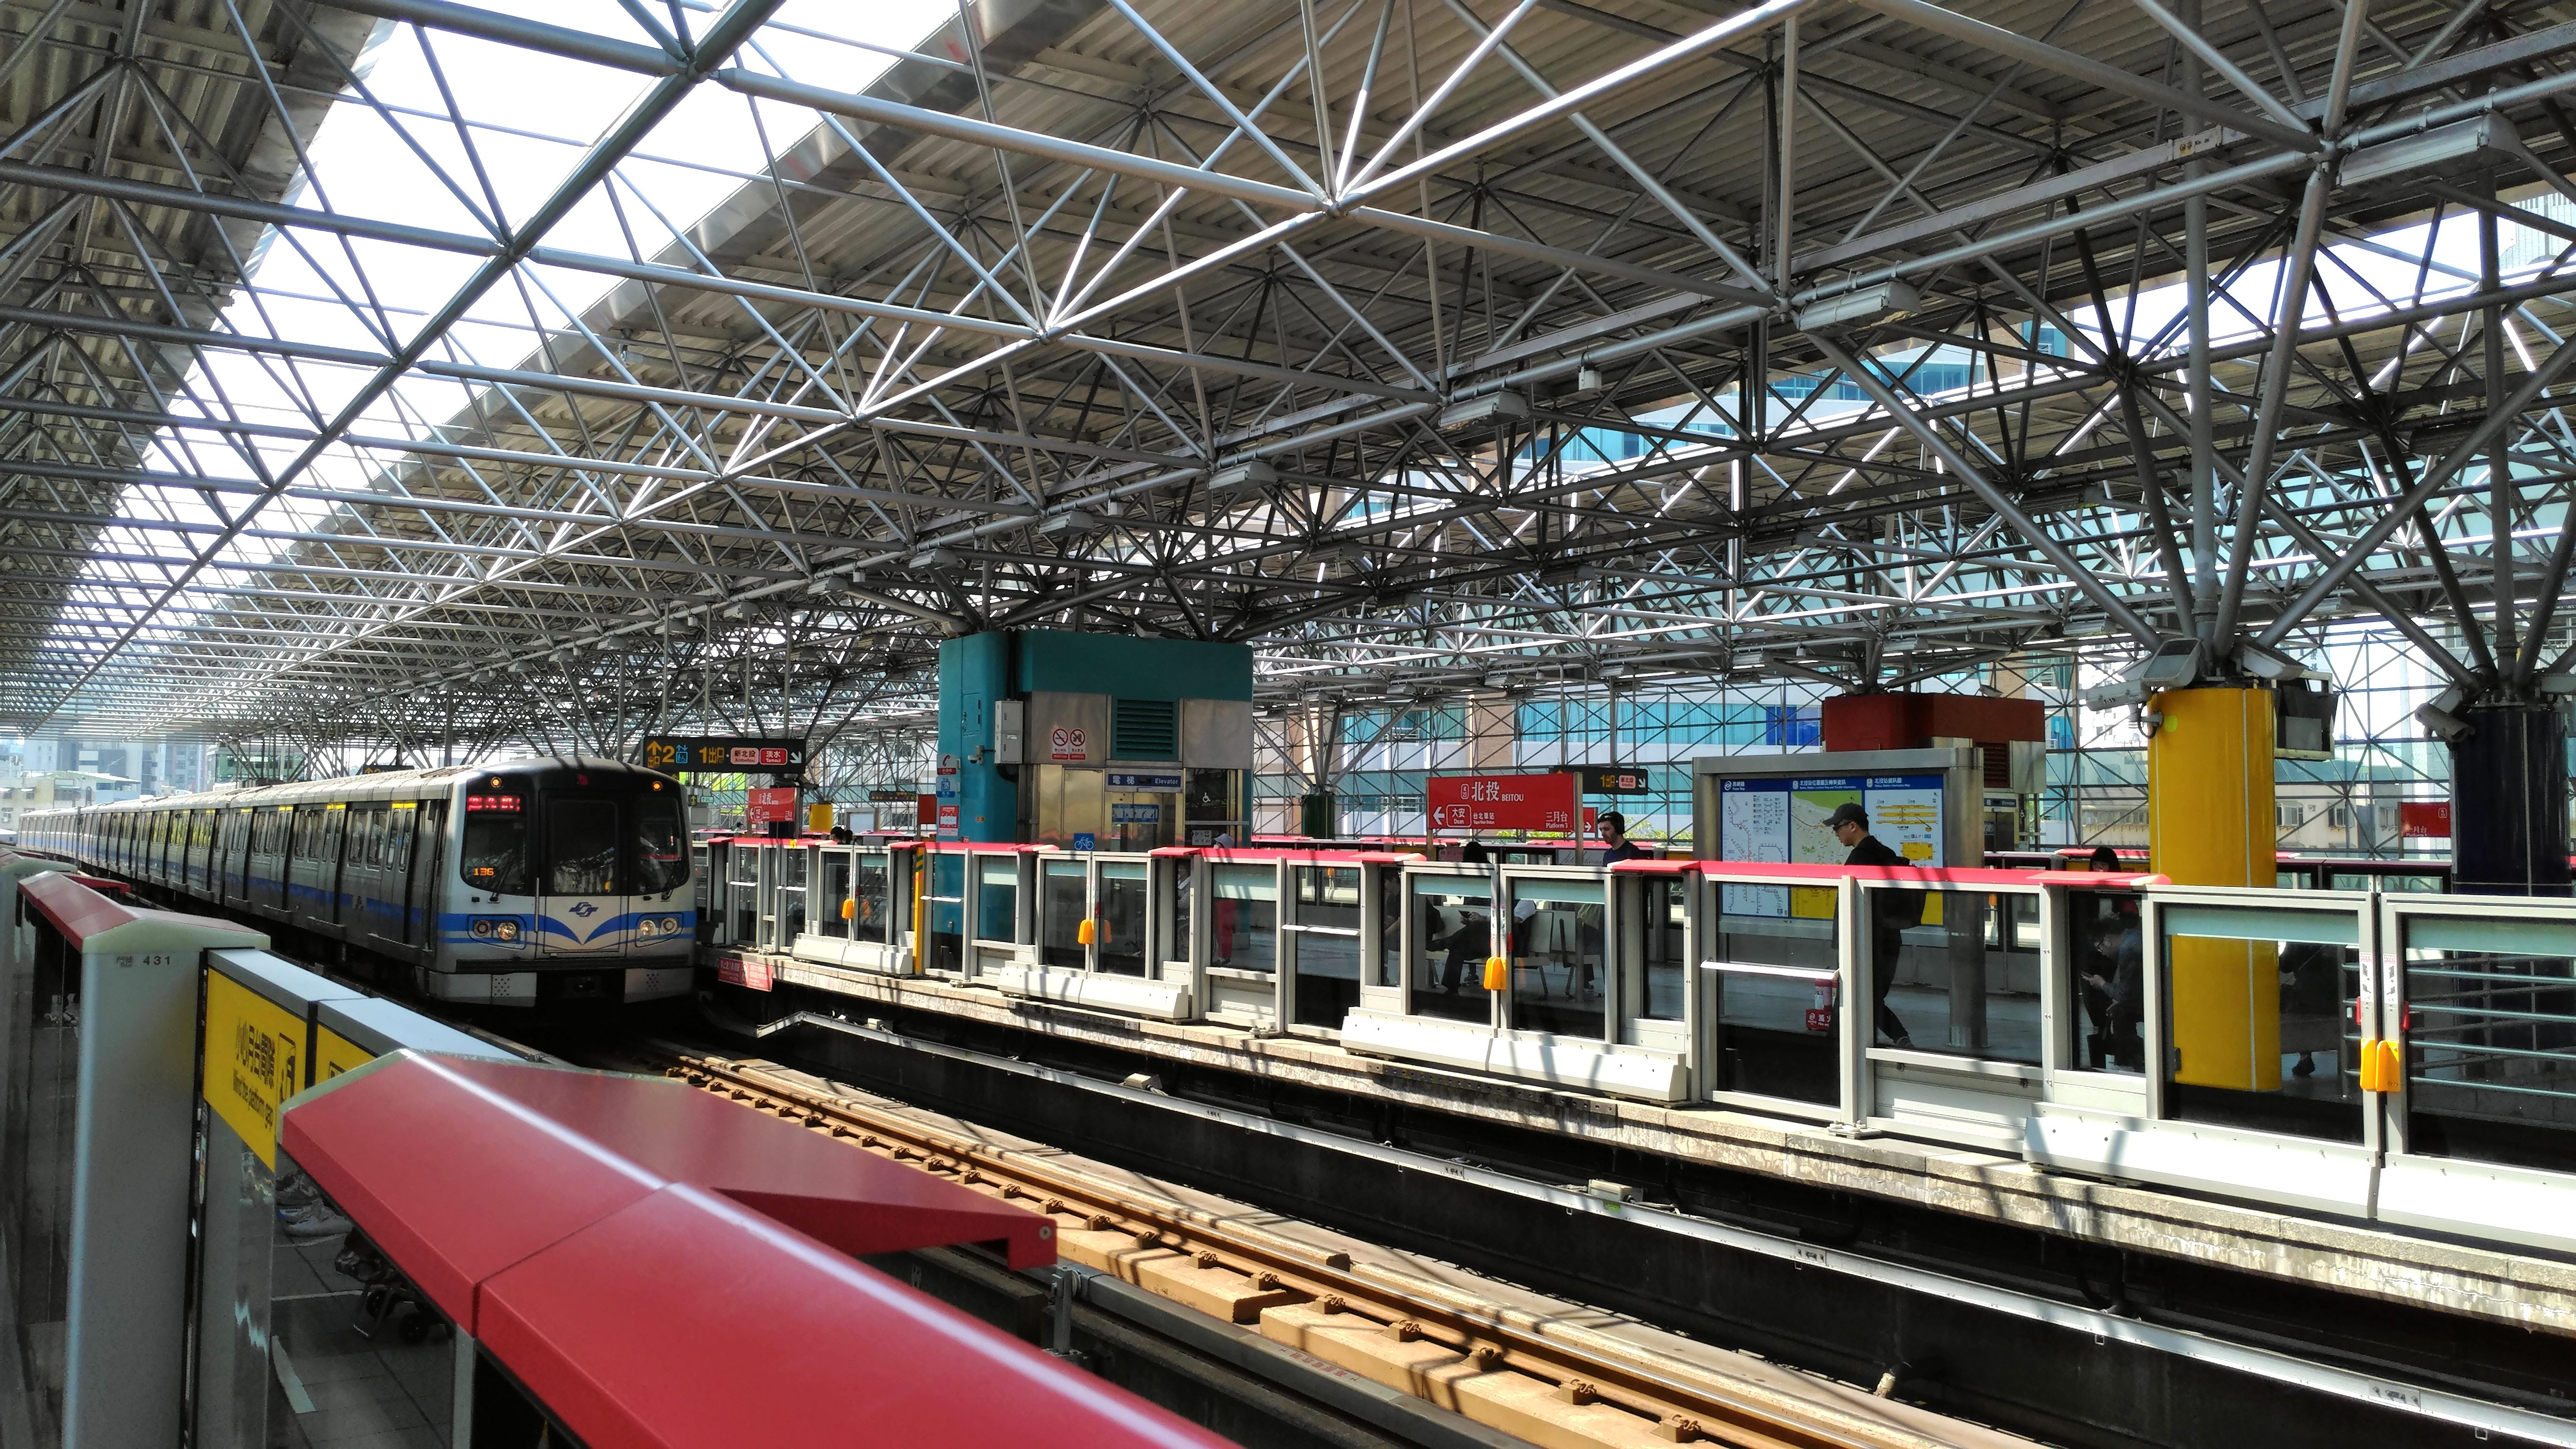 A MRT train arriving at the station